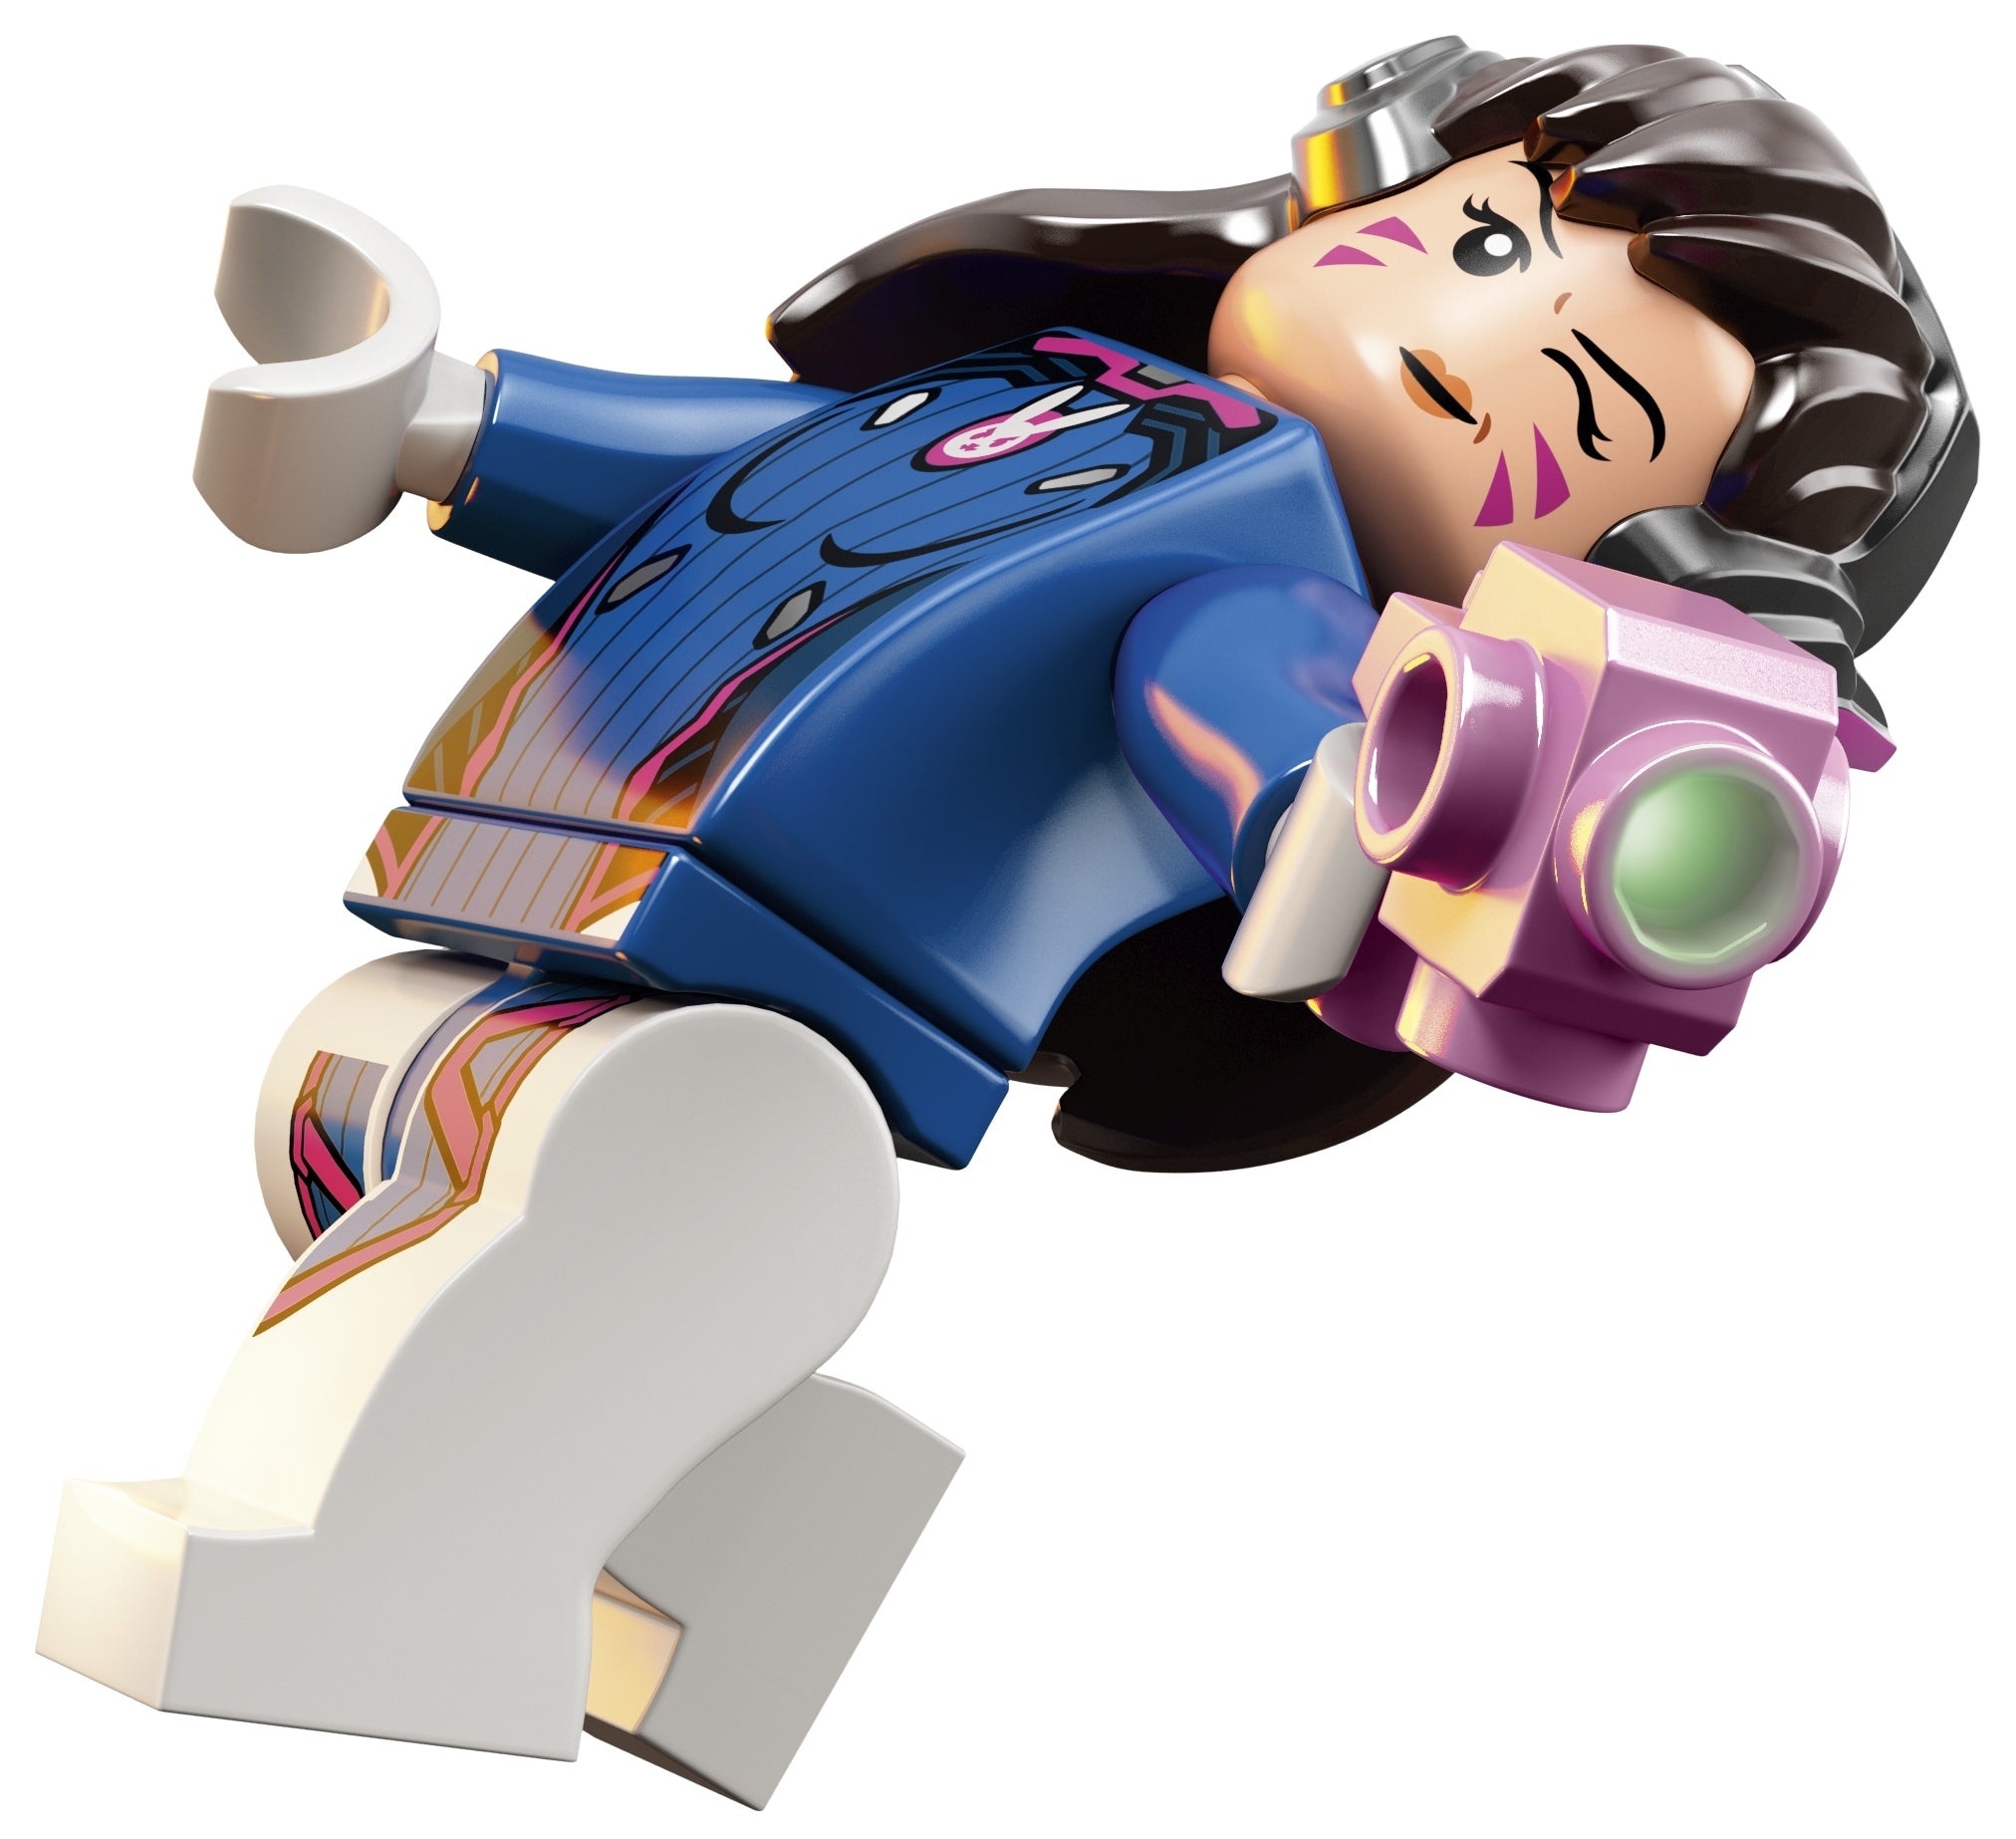 Image for The Overwatch Lego sets are awesome, and now I'm pining for more Lego video game crossovers